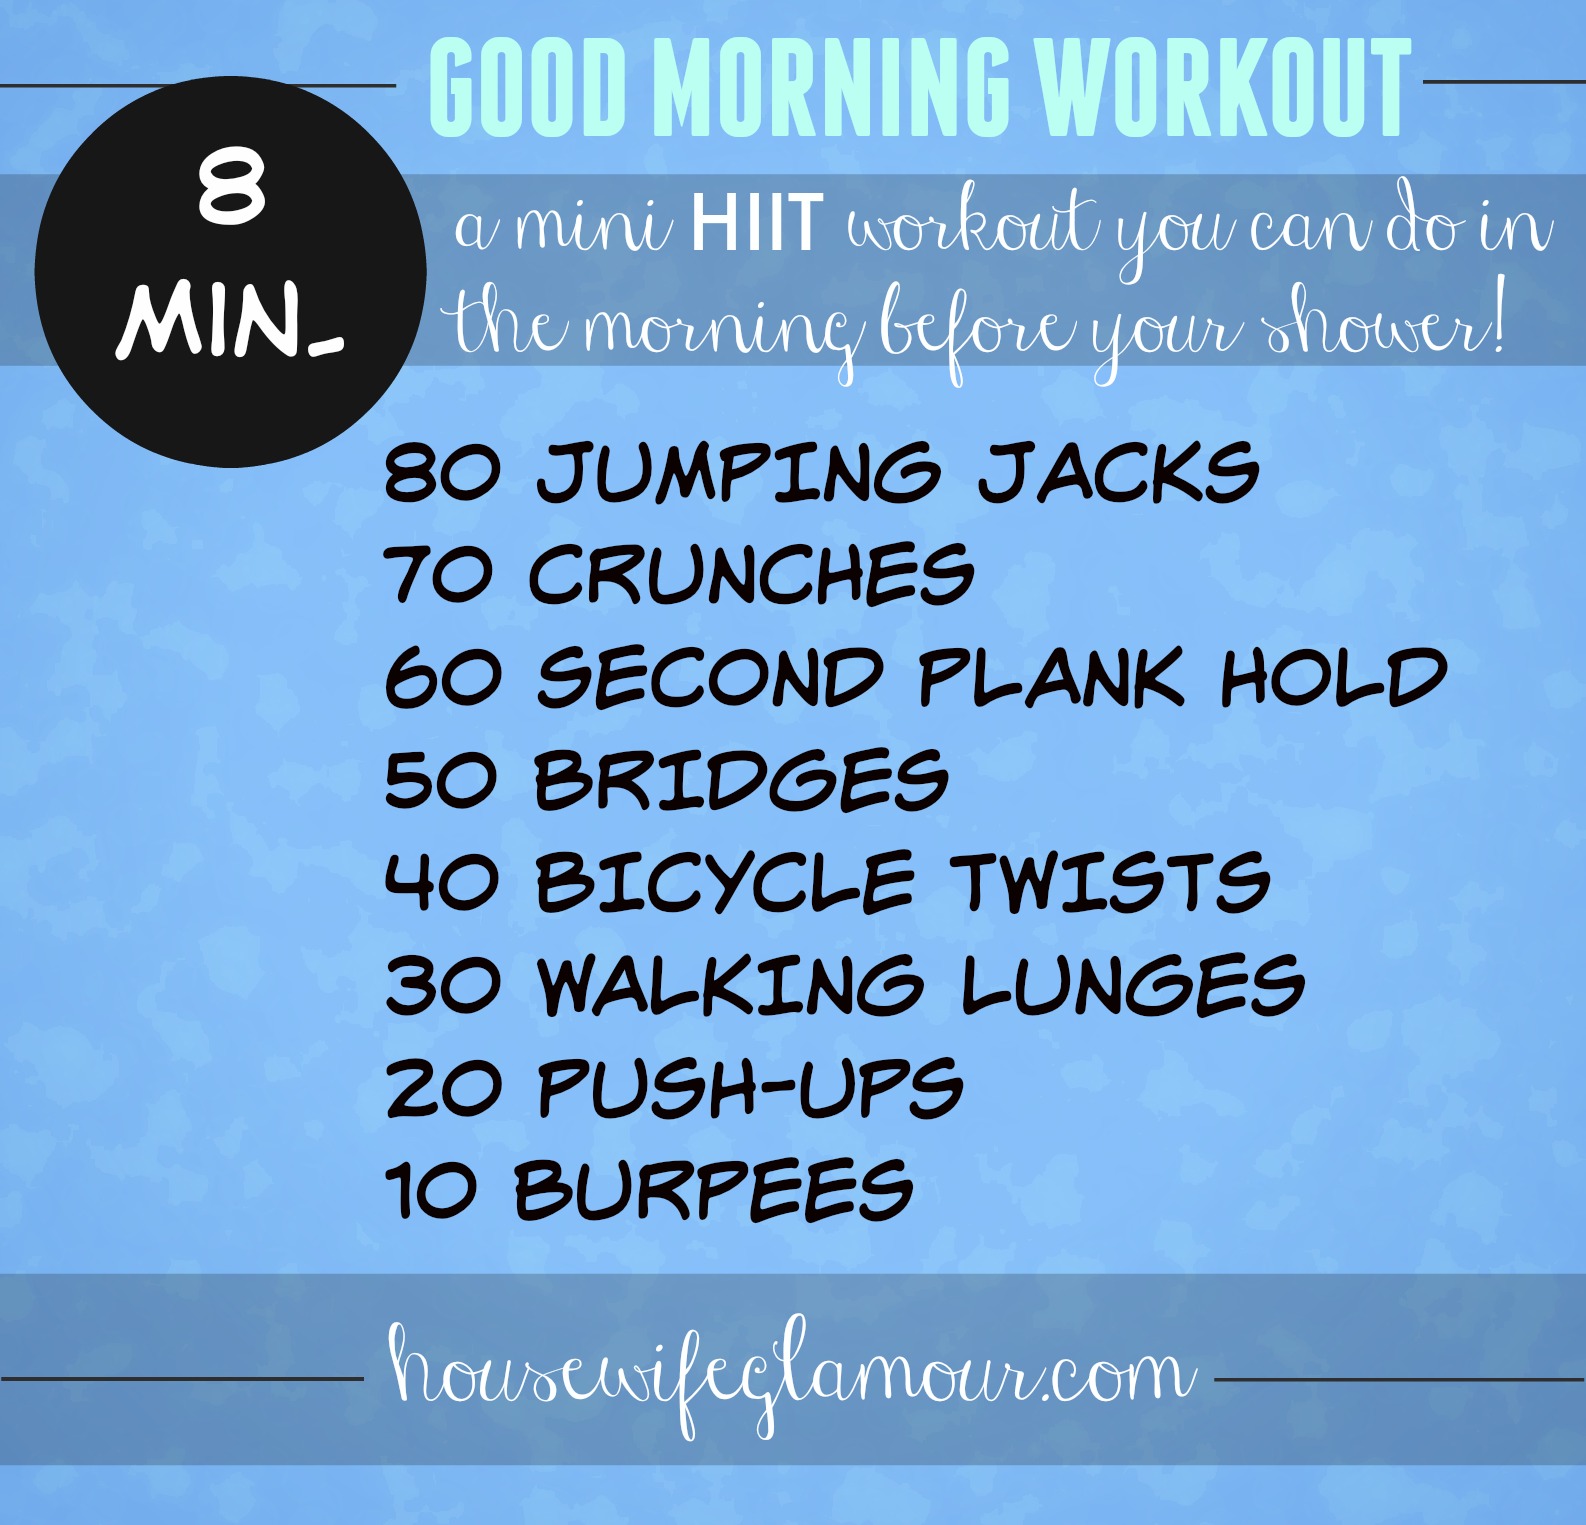 https://www.trimmedandtoned.com/wp-content/uploads/2015/04/Mini-HIIT-workout-before-your-shower1.jpg